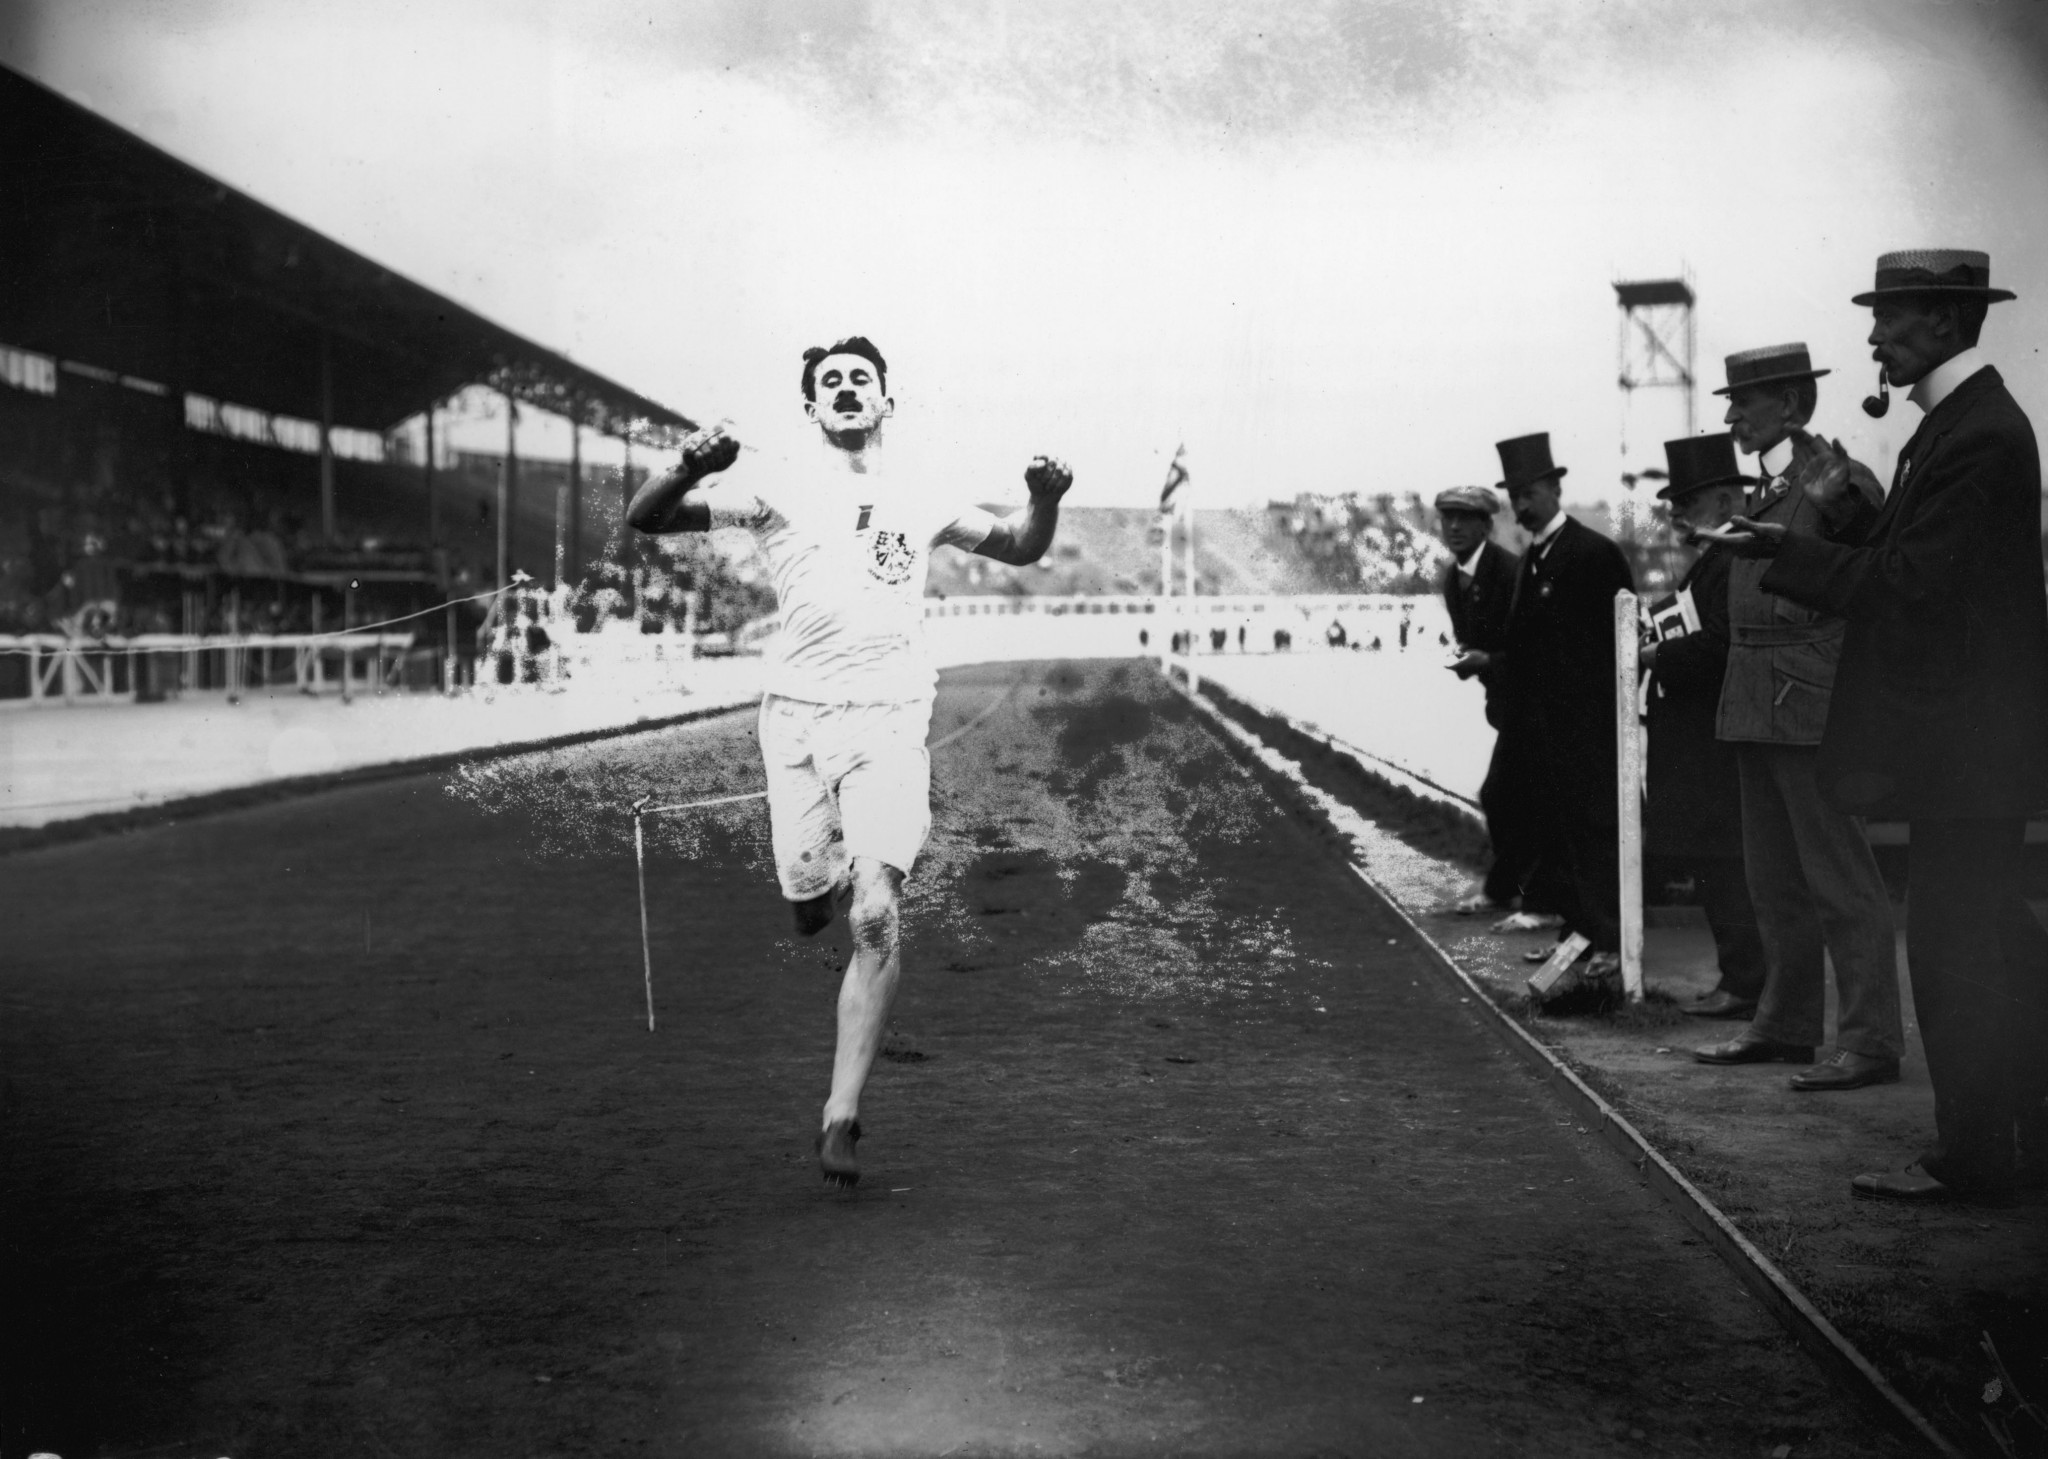 Lieutenant Wyndham Halswelle crosses the line in the re-run of the Olympic men's 400m final at London 1908 ©Getty Images